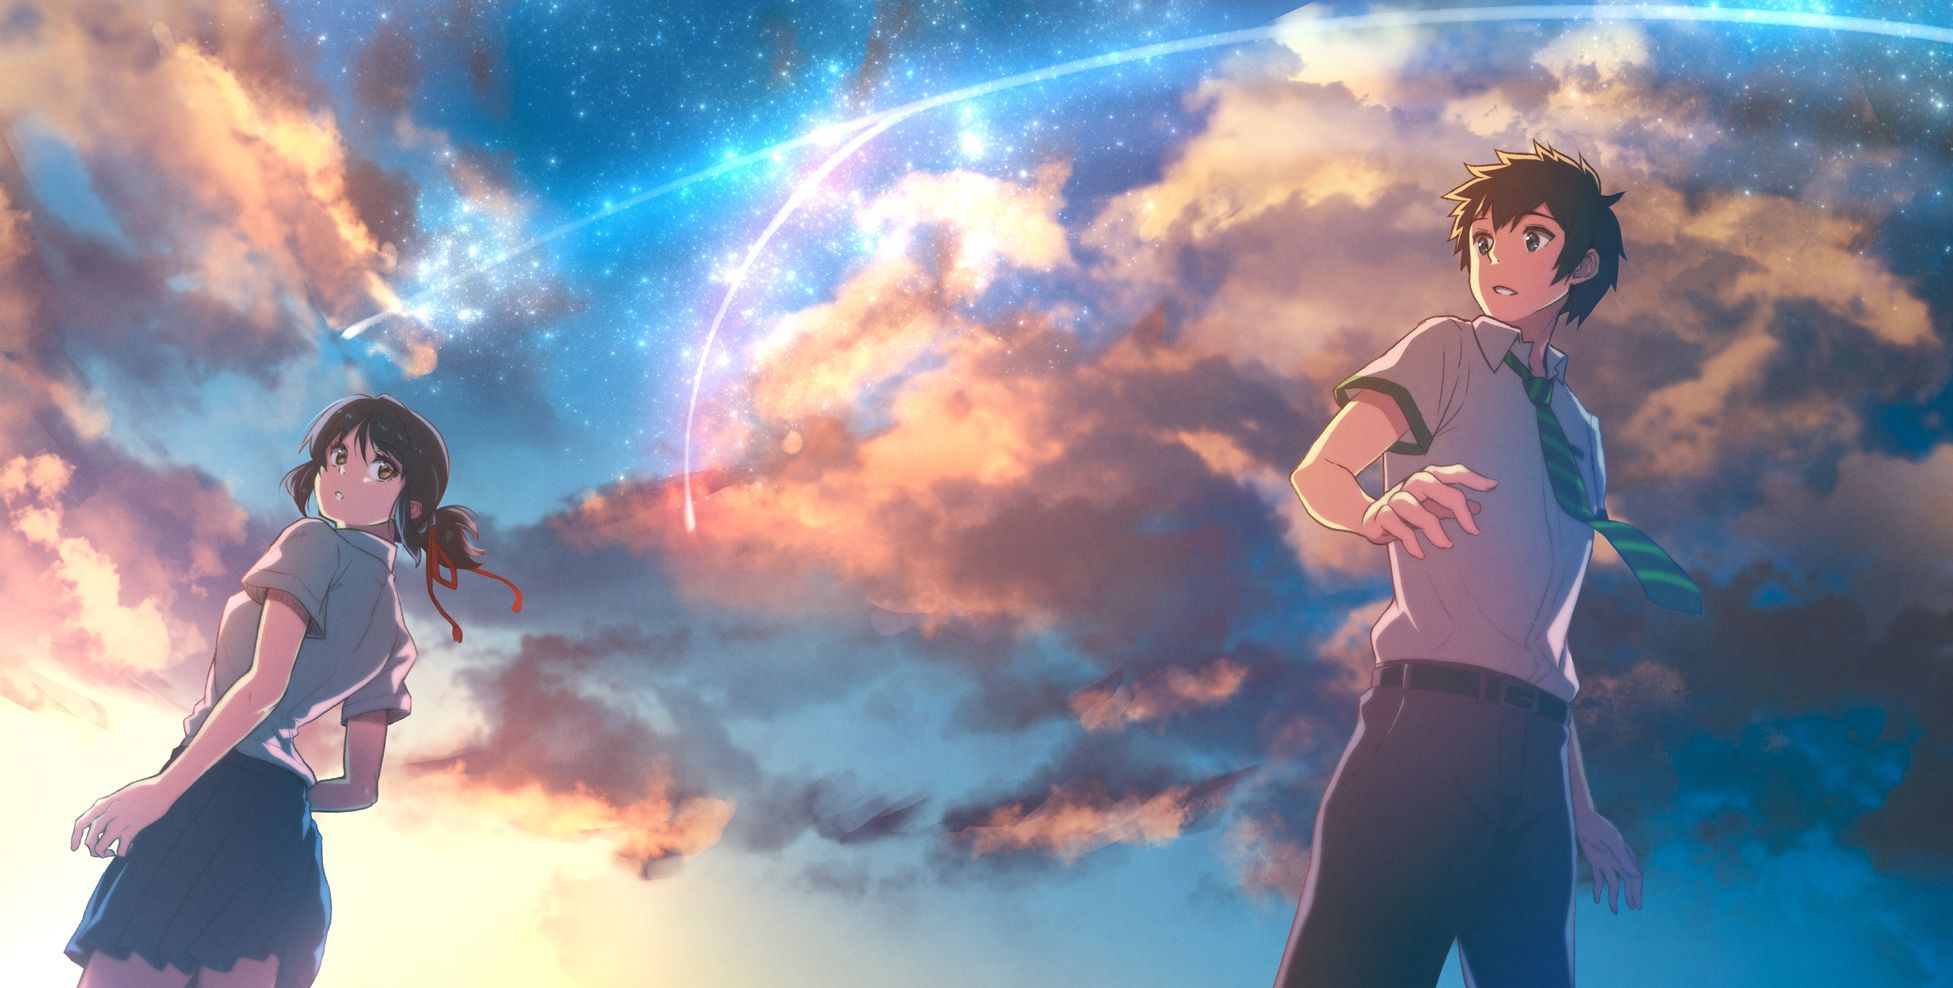 Your Name Anime Wallpaper Free Your Name Anime Background